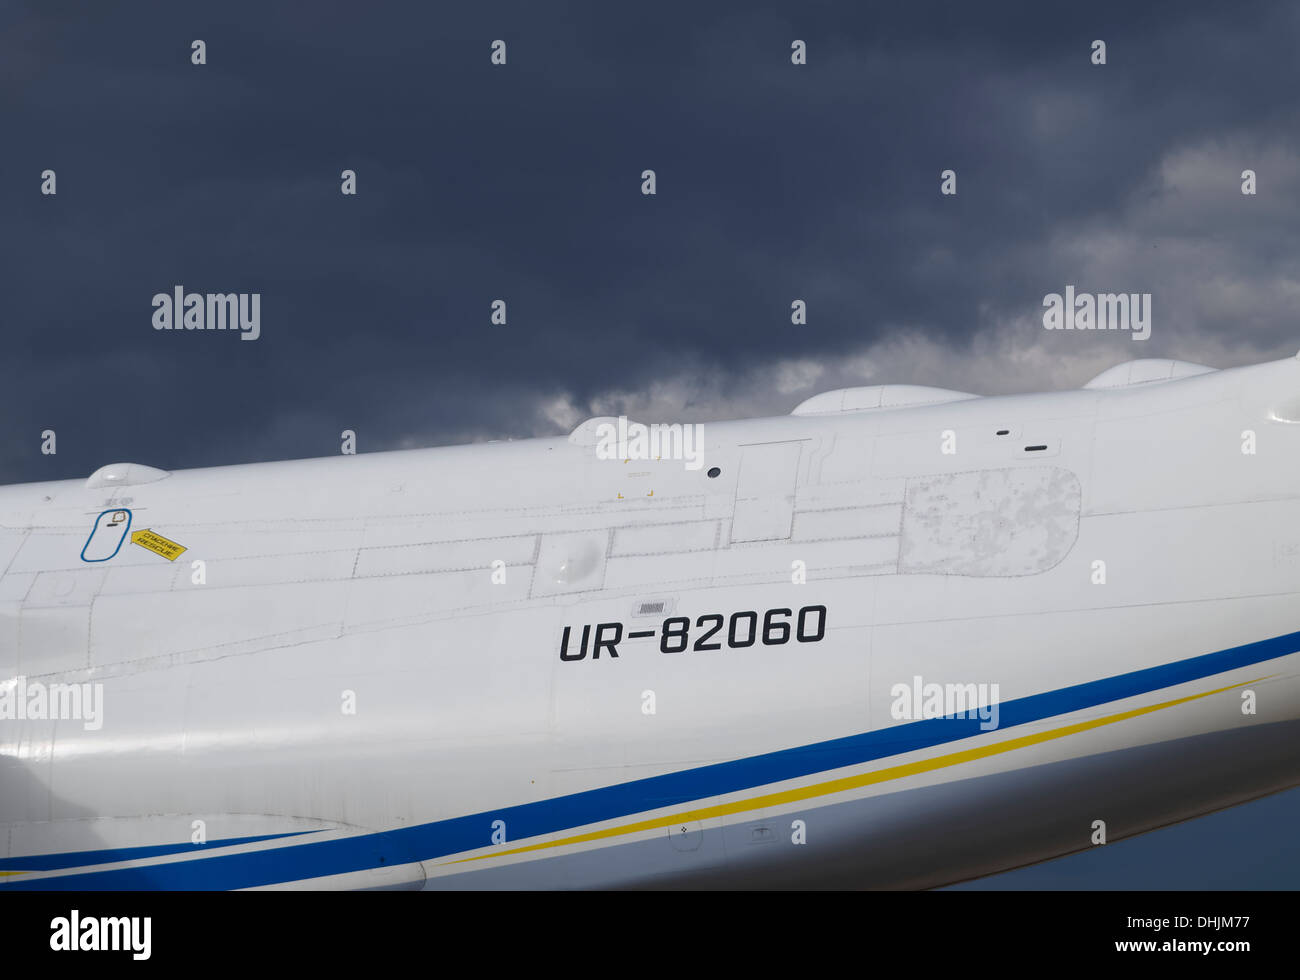 Part of the gigantic Antonov An-225 Mriya fuselage with visible registration number. Stock Photo